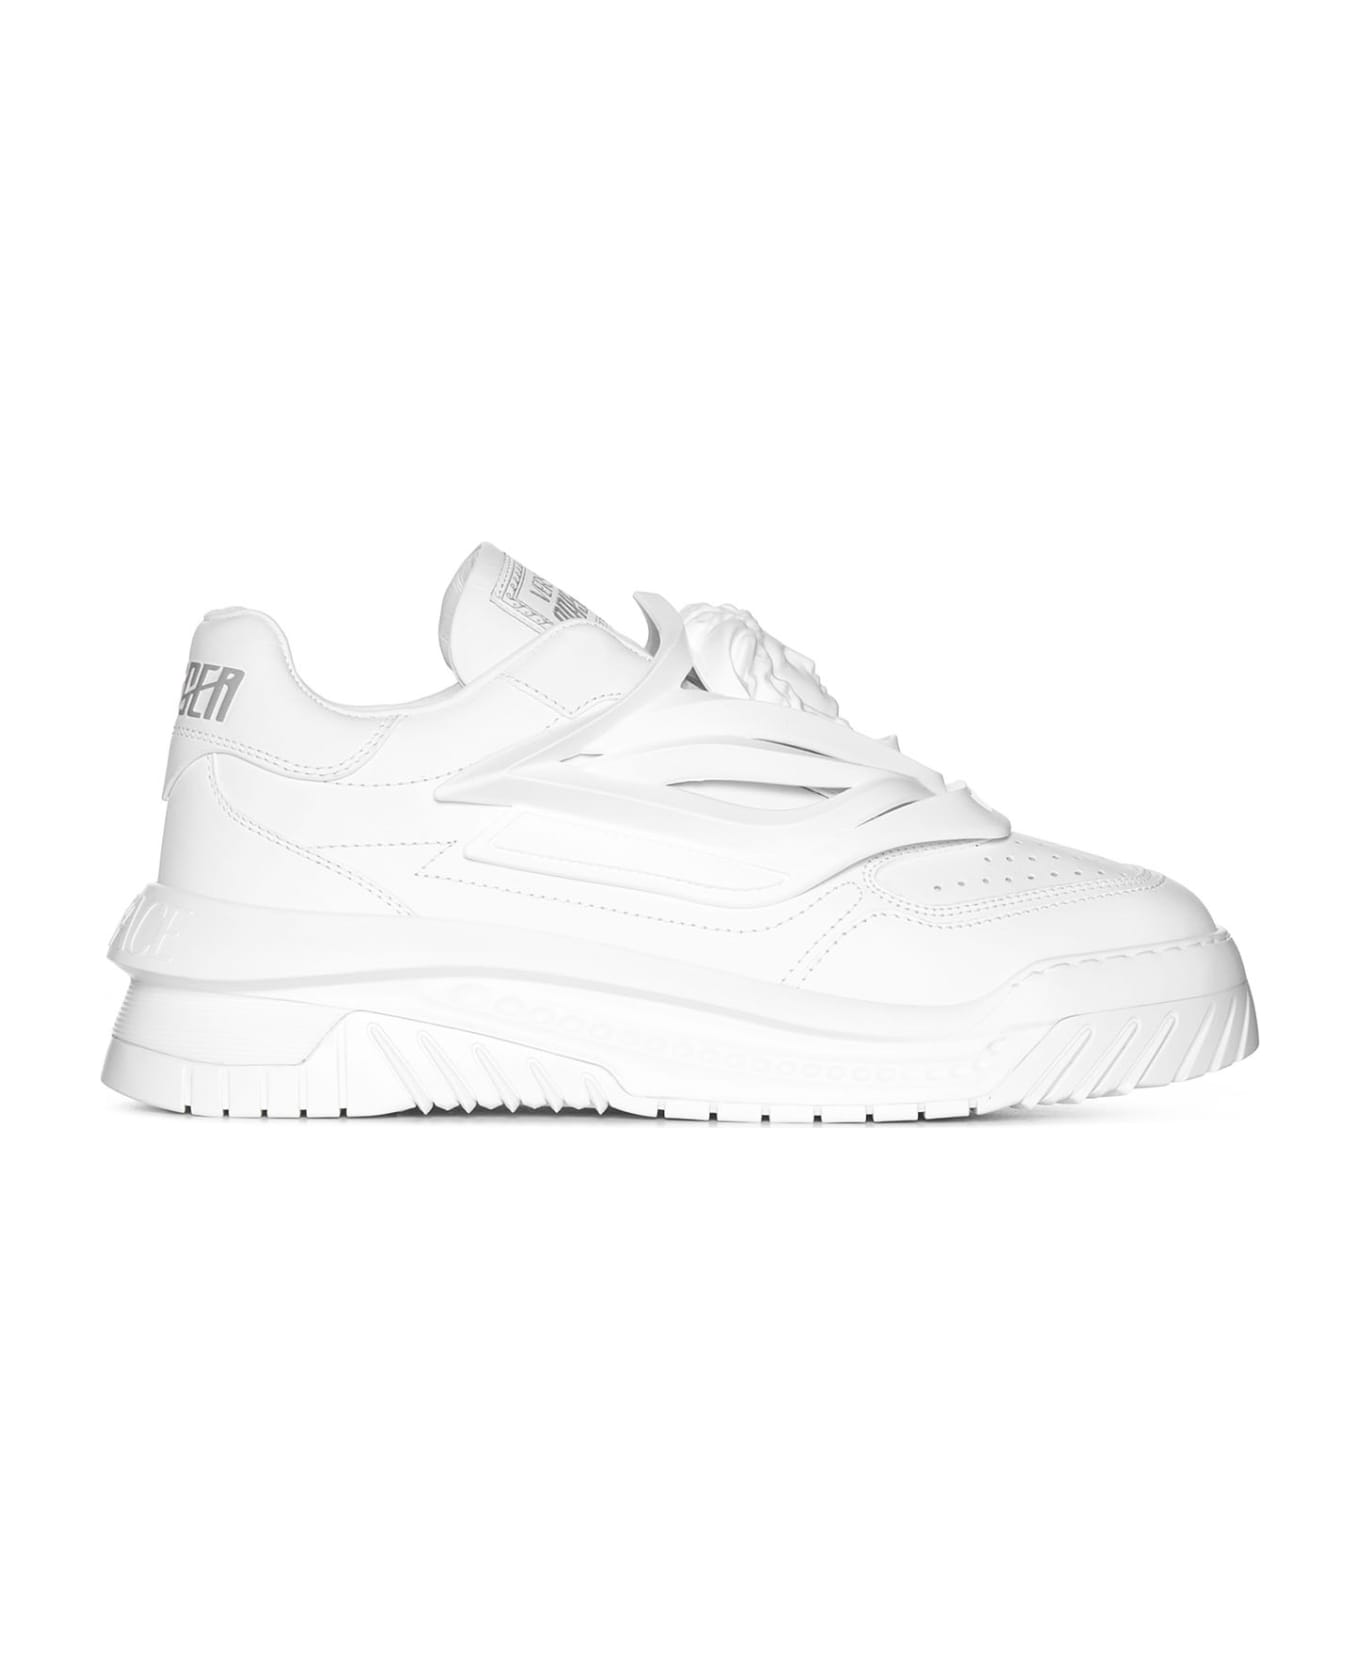 Versace White 'odissea' Sneakers - Bianco スニーカー